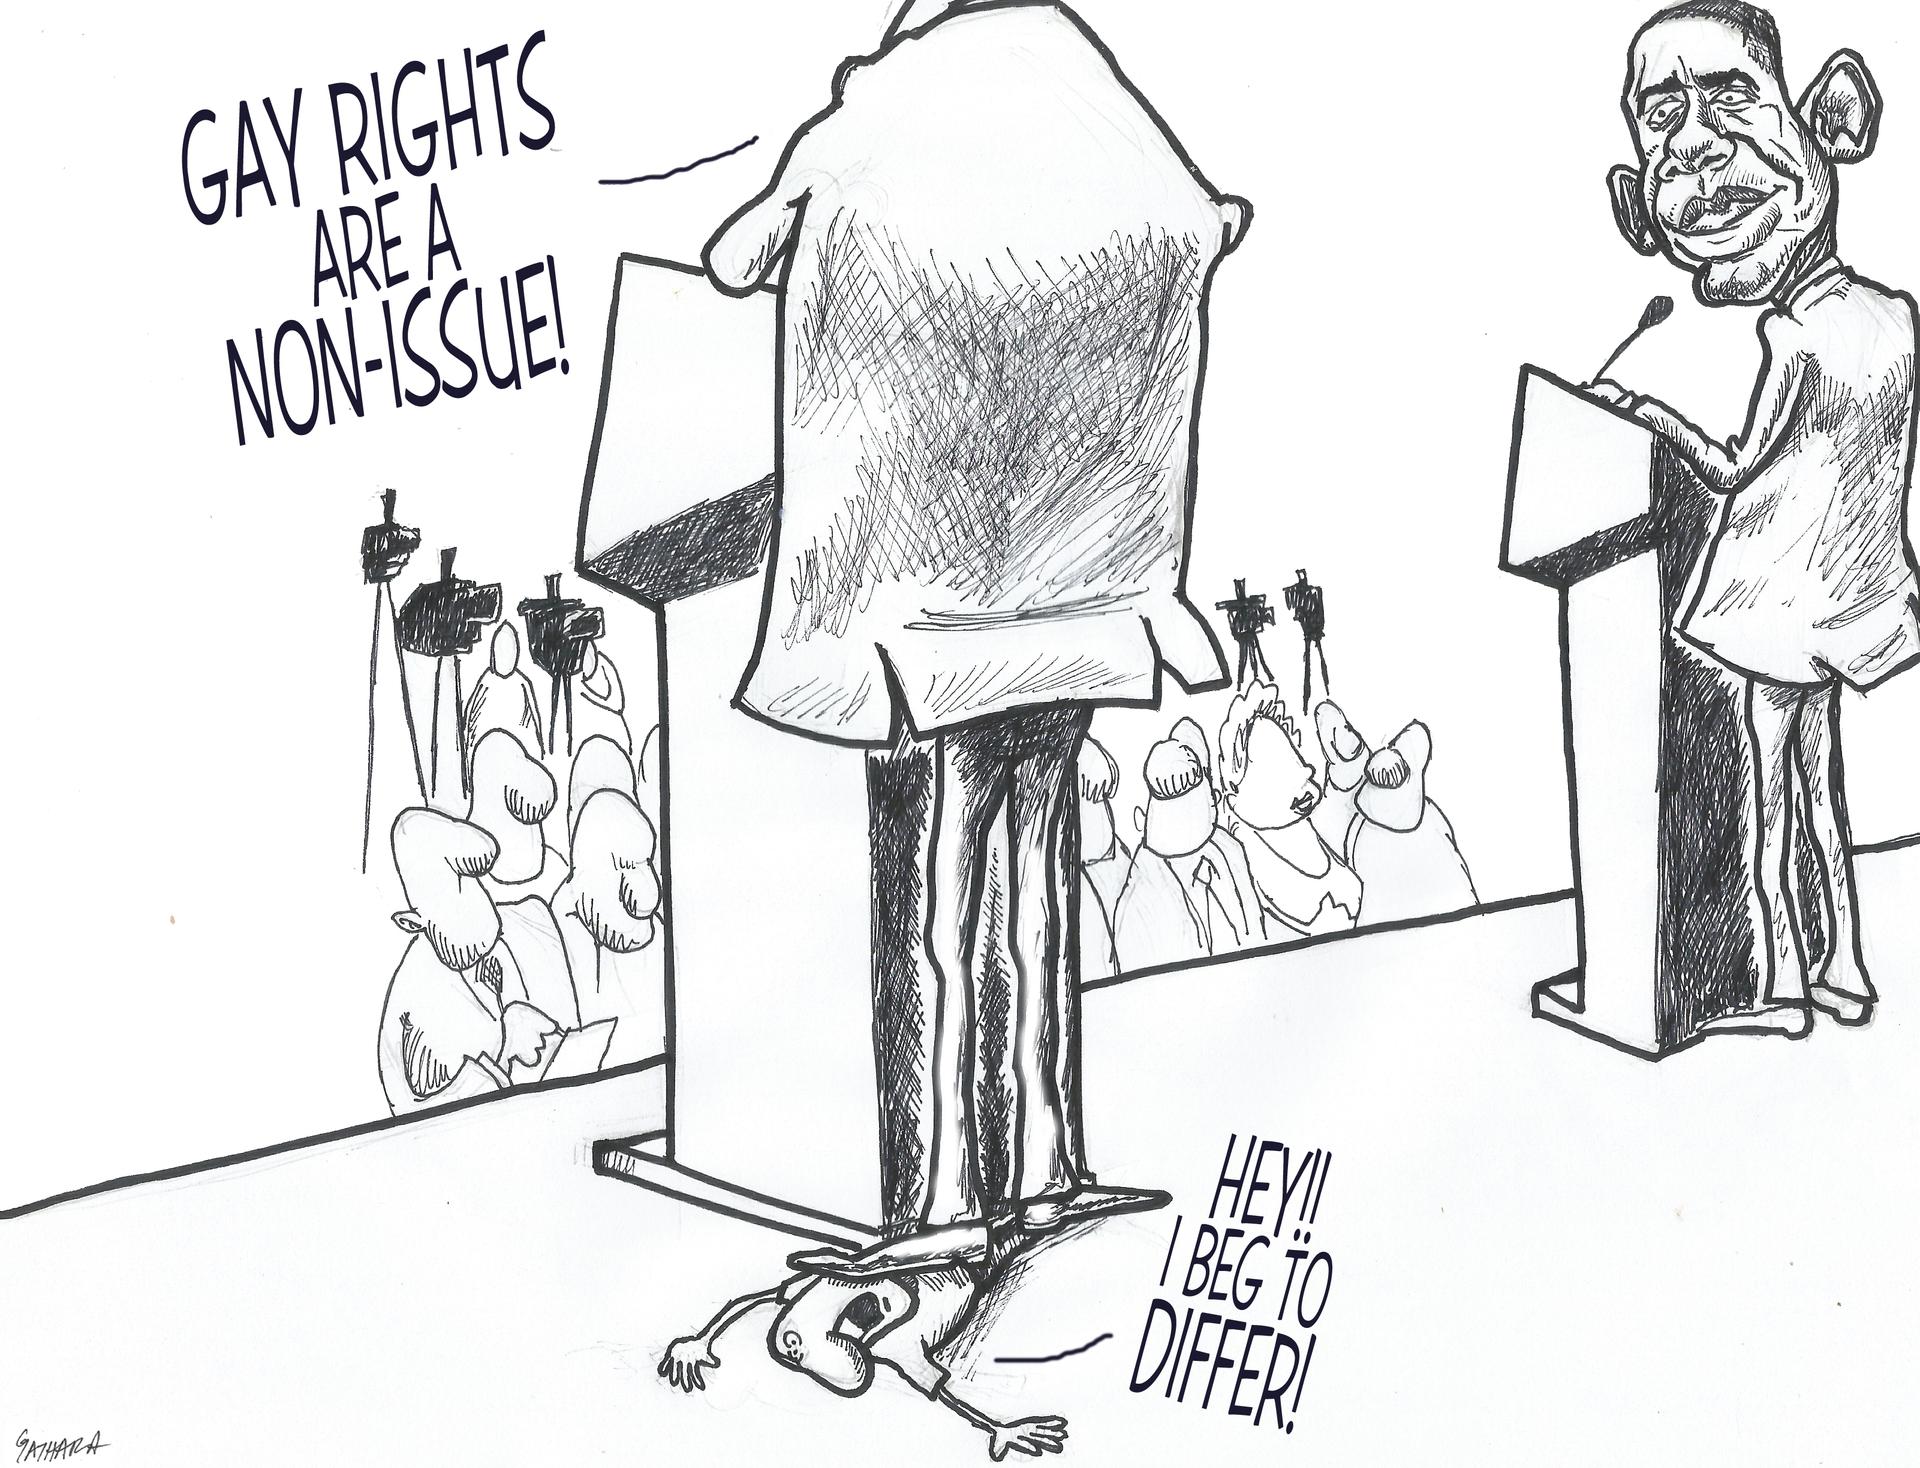 Patrick Gathara drew this cartoon after President Barack Obama and President Uhuru Kenyatta offered dramatically different positions on gay rights at a news conference on the first full day of Obama's visit to Kenya in July 2015. President Obama spoke str